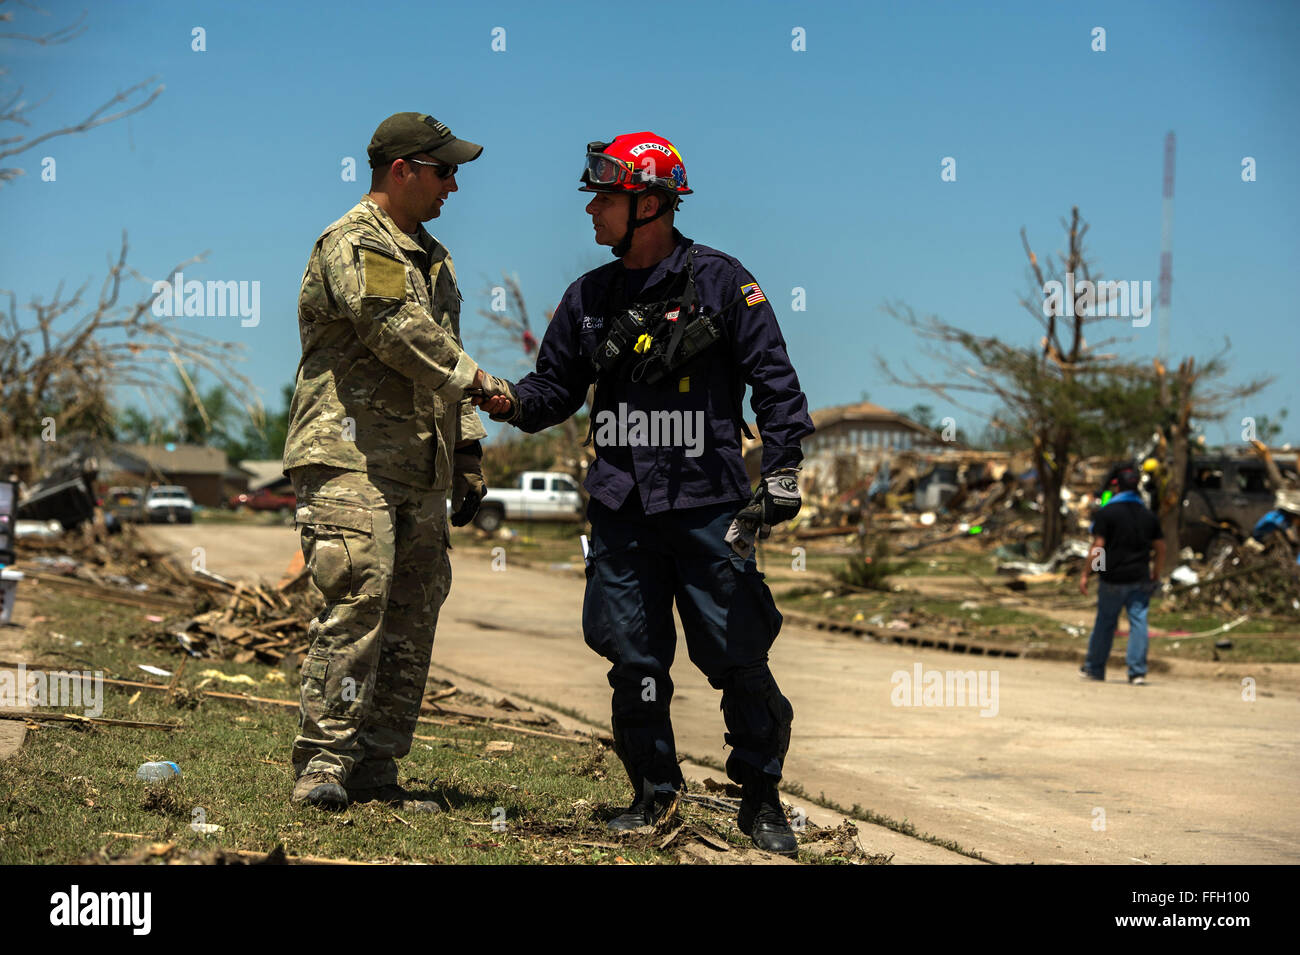 U.S. Air Force Tech. Sgt. Brandon White, Joint Terminal Attack Controller assigned to the 138th Combat Training Flight, talk with local a firefighter May 22, 2013, in Moore, Okla. On Monday a EF-5 tornado, with winds reaching at least 200 mph, traveled for 20 miles, leaving a two-mile-wide path of destruction, leveling homes, crushing vehicles, and killing more than 20 people. More than 115 Oklahoma National Guard have been activated to assist in the rescue and relief efforts. Stock Photo